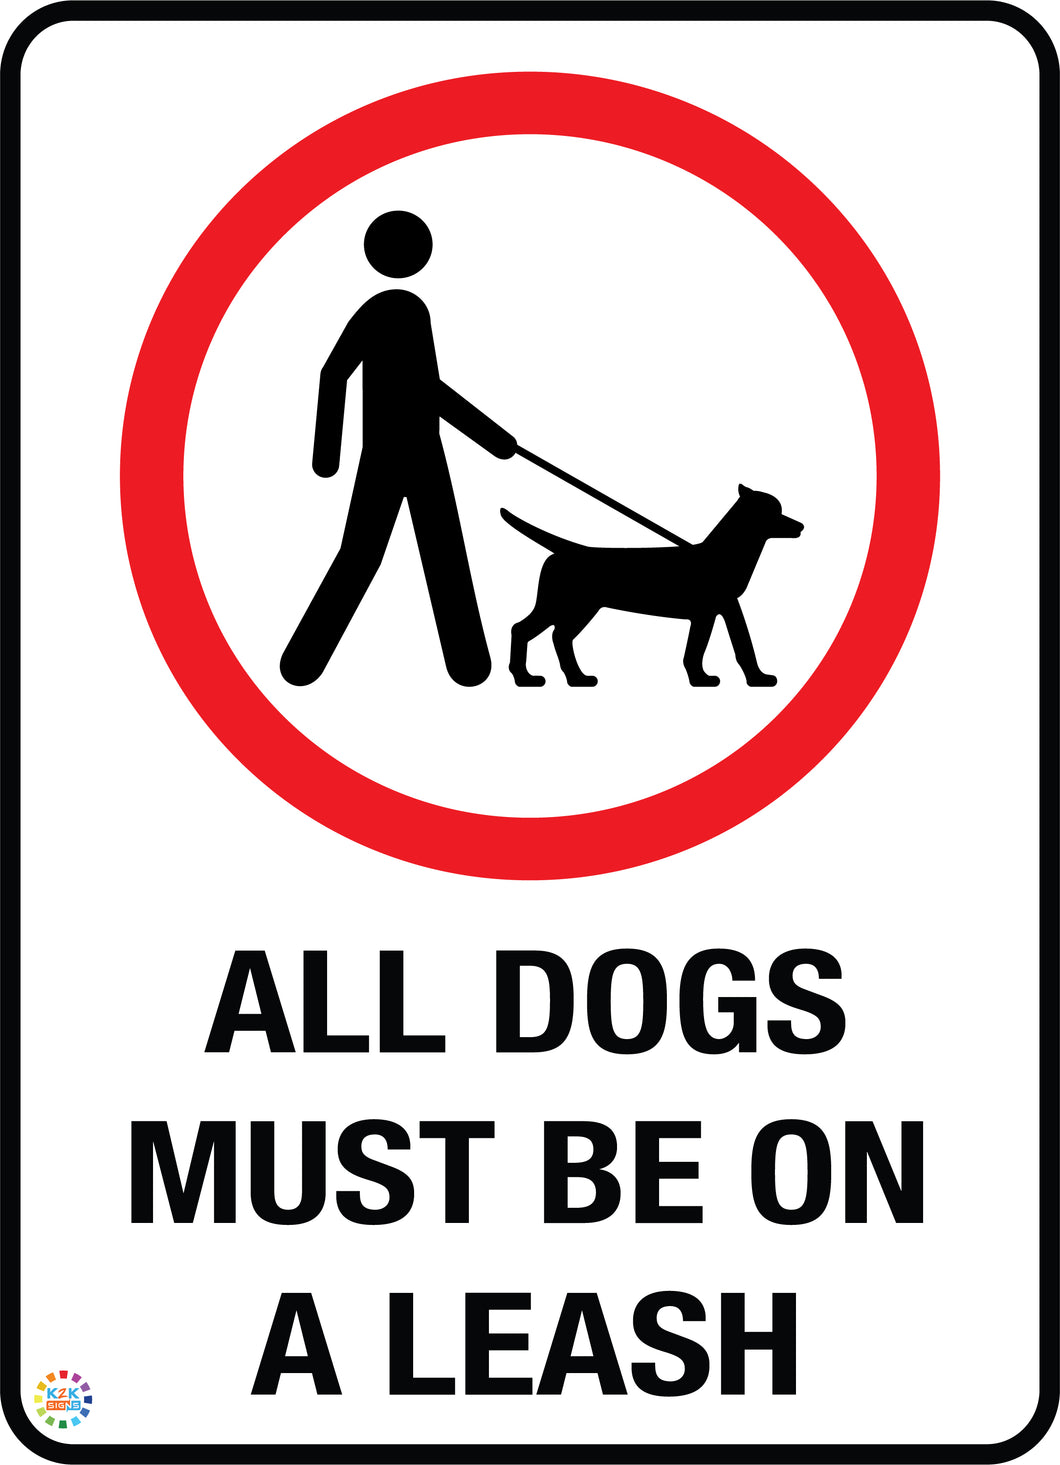 All Dogs Must Be On A Leash - Red Variant